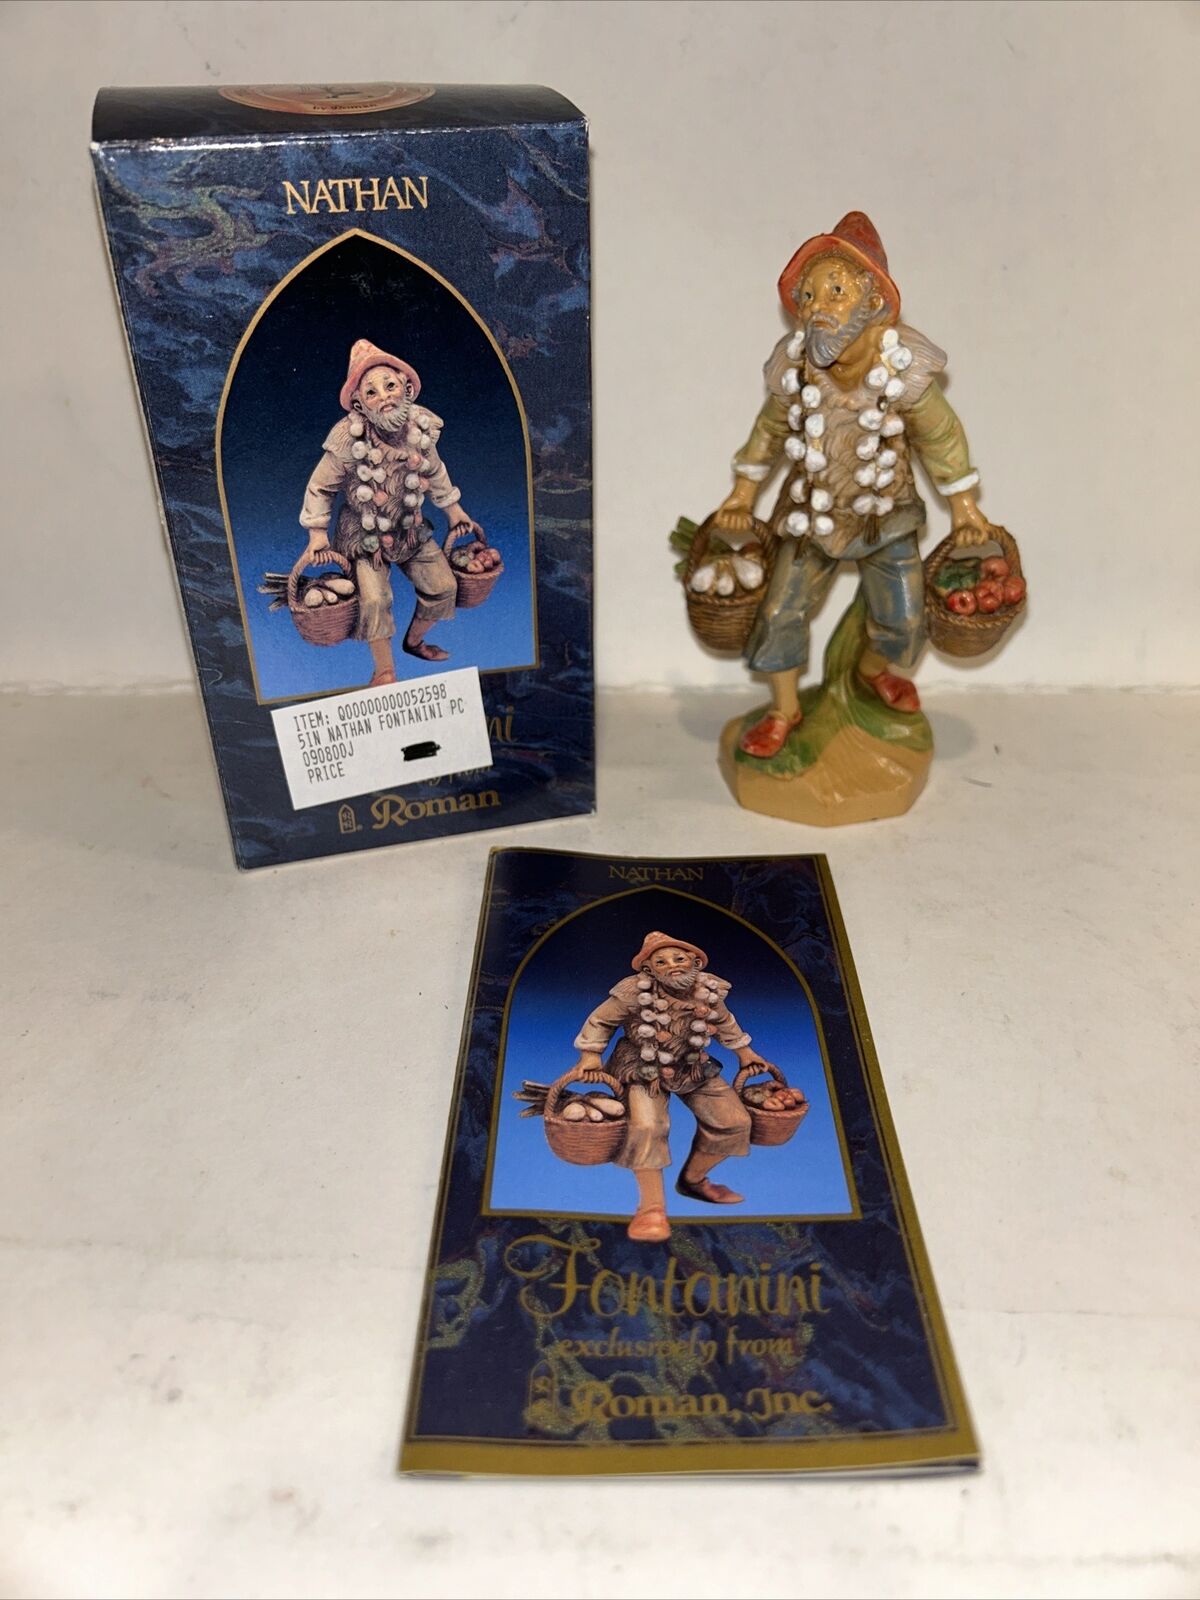 Fontanini Heirloom Nativity Collection “Nathan” by Roman from Italy New In Box